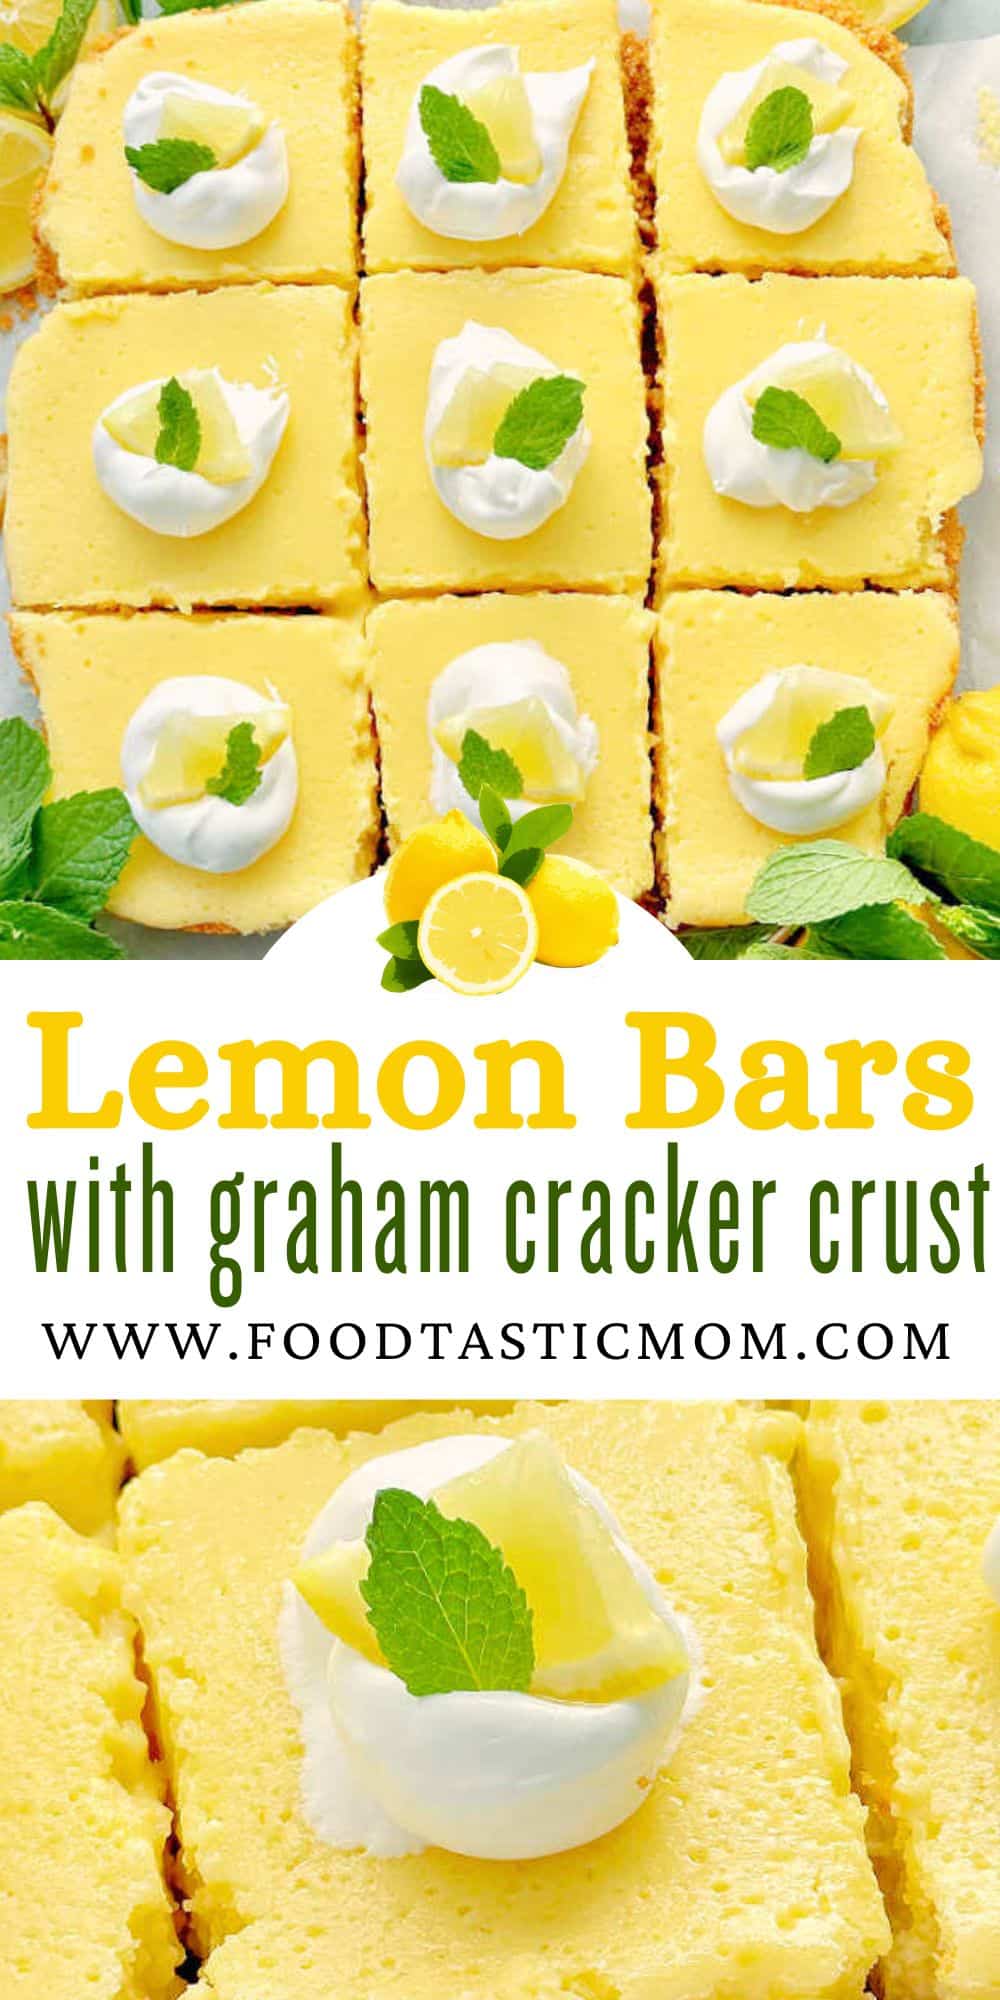 These 7 ingredient Lemon Bars with Graham Cracker Crust are a truly impressive dessert that take very little effort to make. via @foodtasticmom